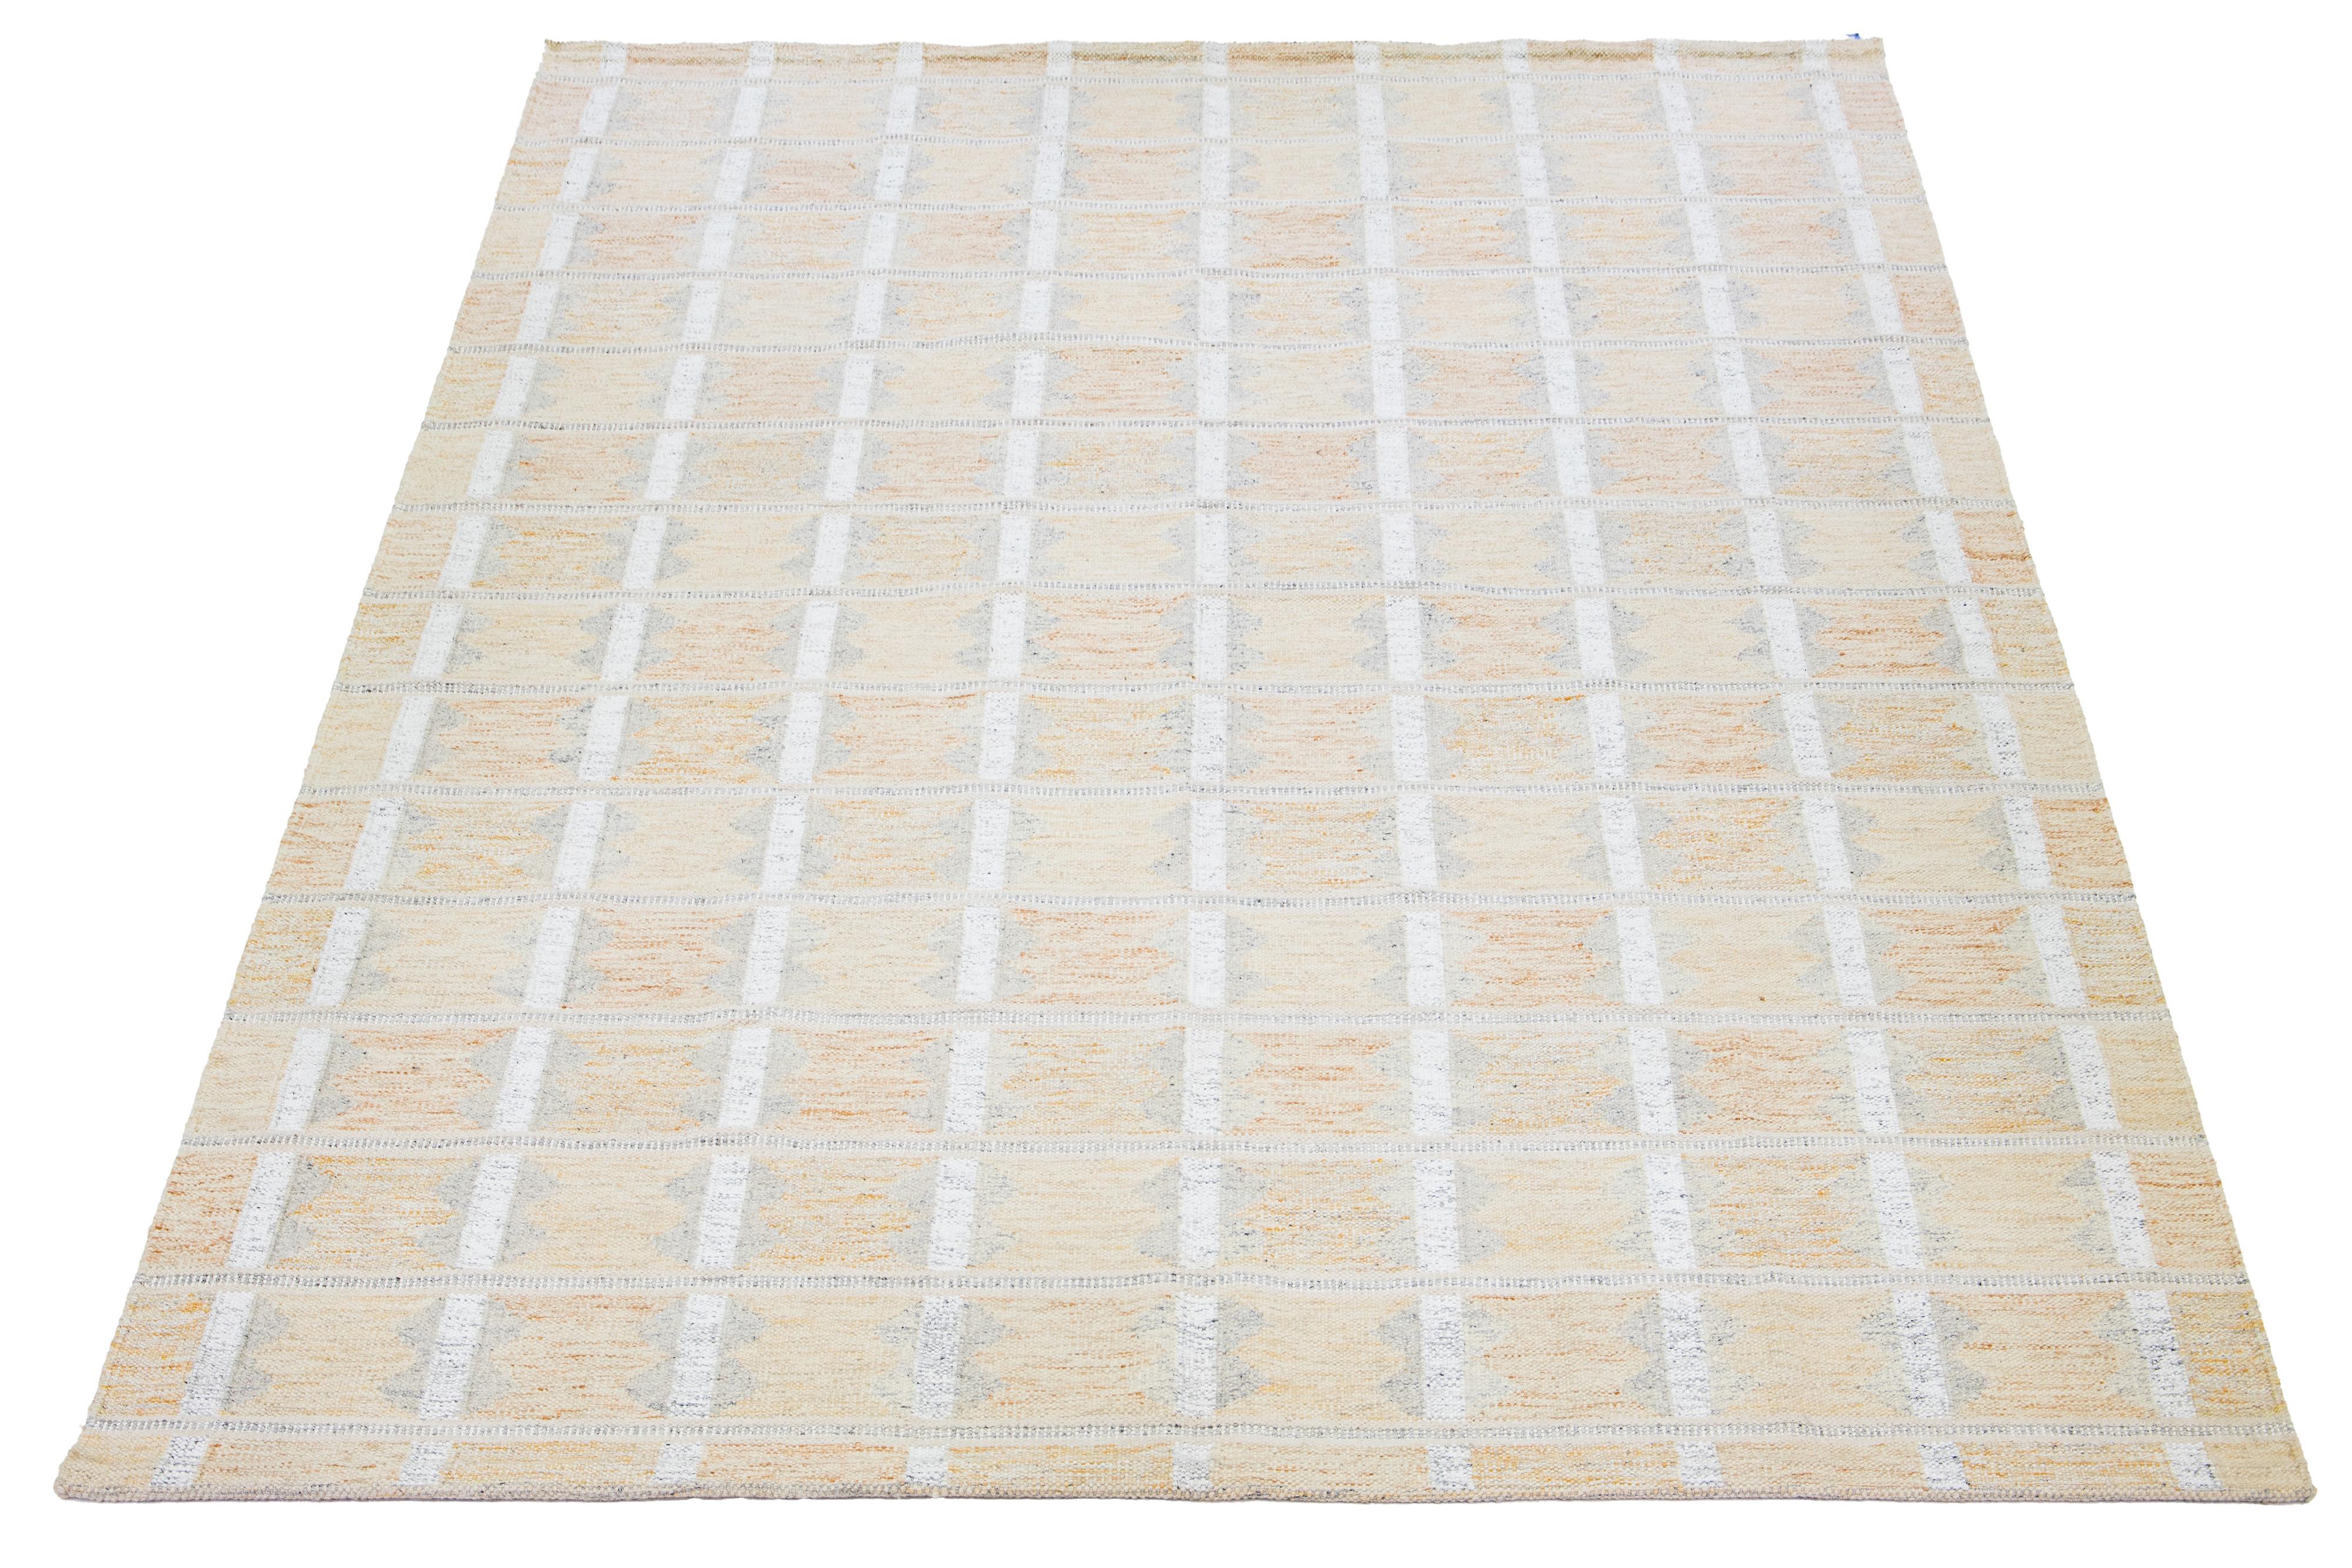 This flatweave rug features a chic contemporary Swedish design with an orange field color. It has a geometric pattern throughout the rug in ivory and gray shades.

 This rug measures 10'2